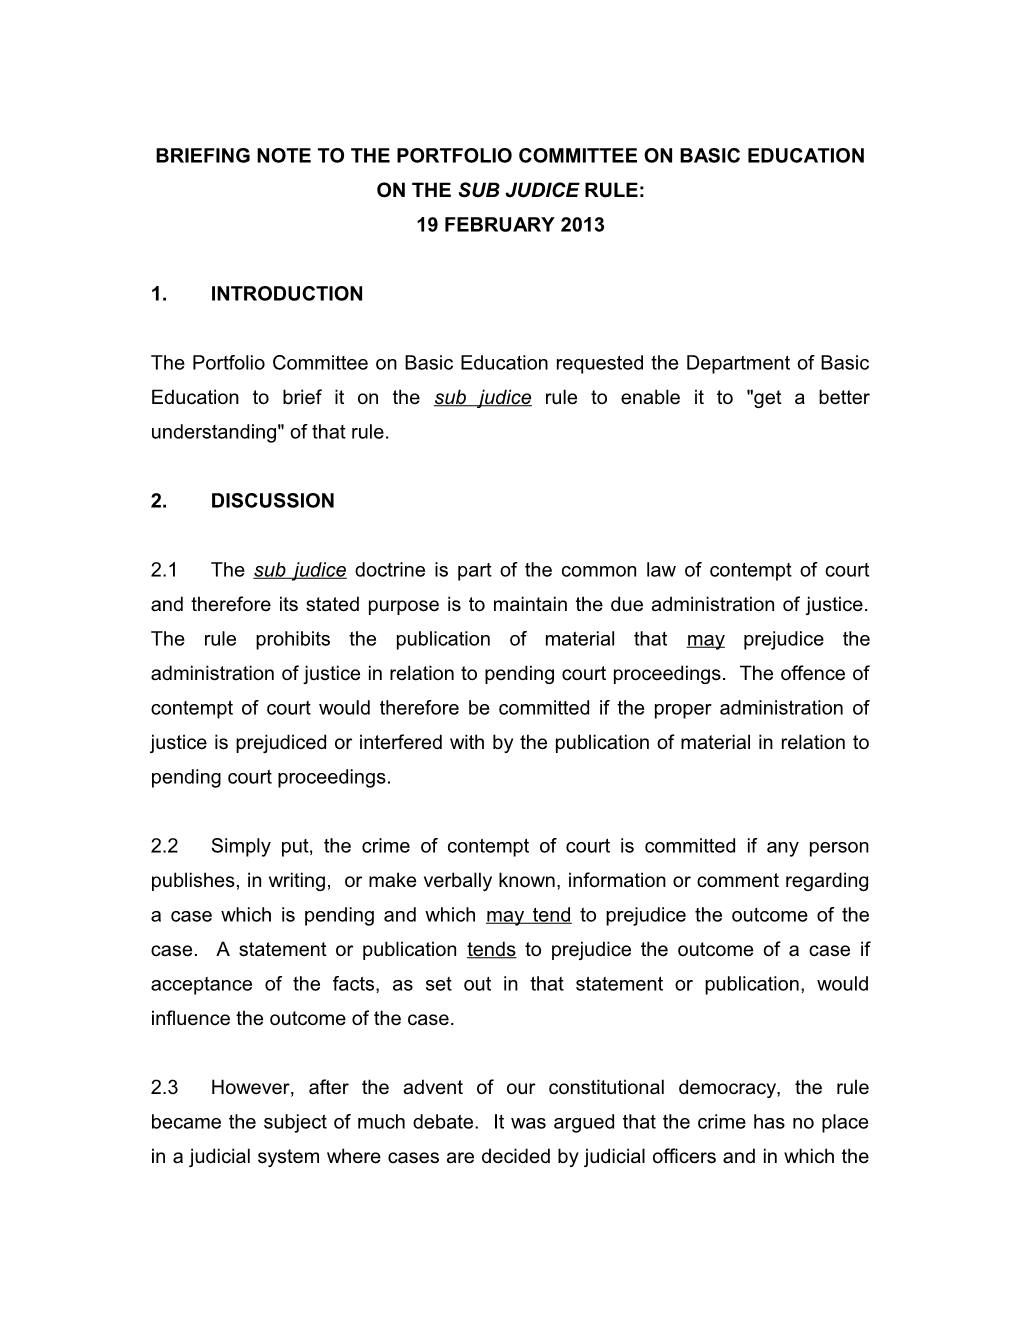 Briefing to the Portfolio Committee on Education on the Sub Judice Rule